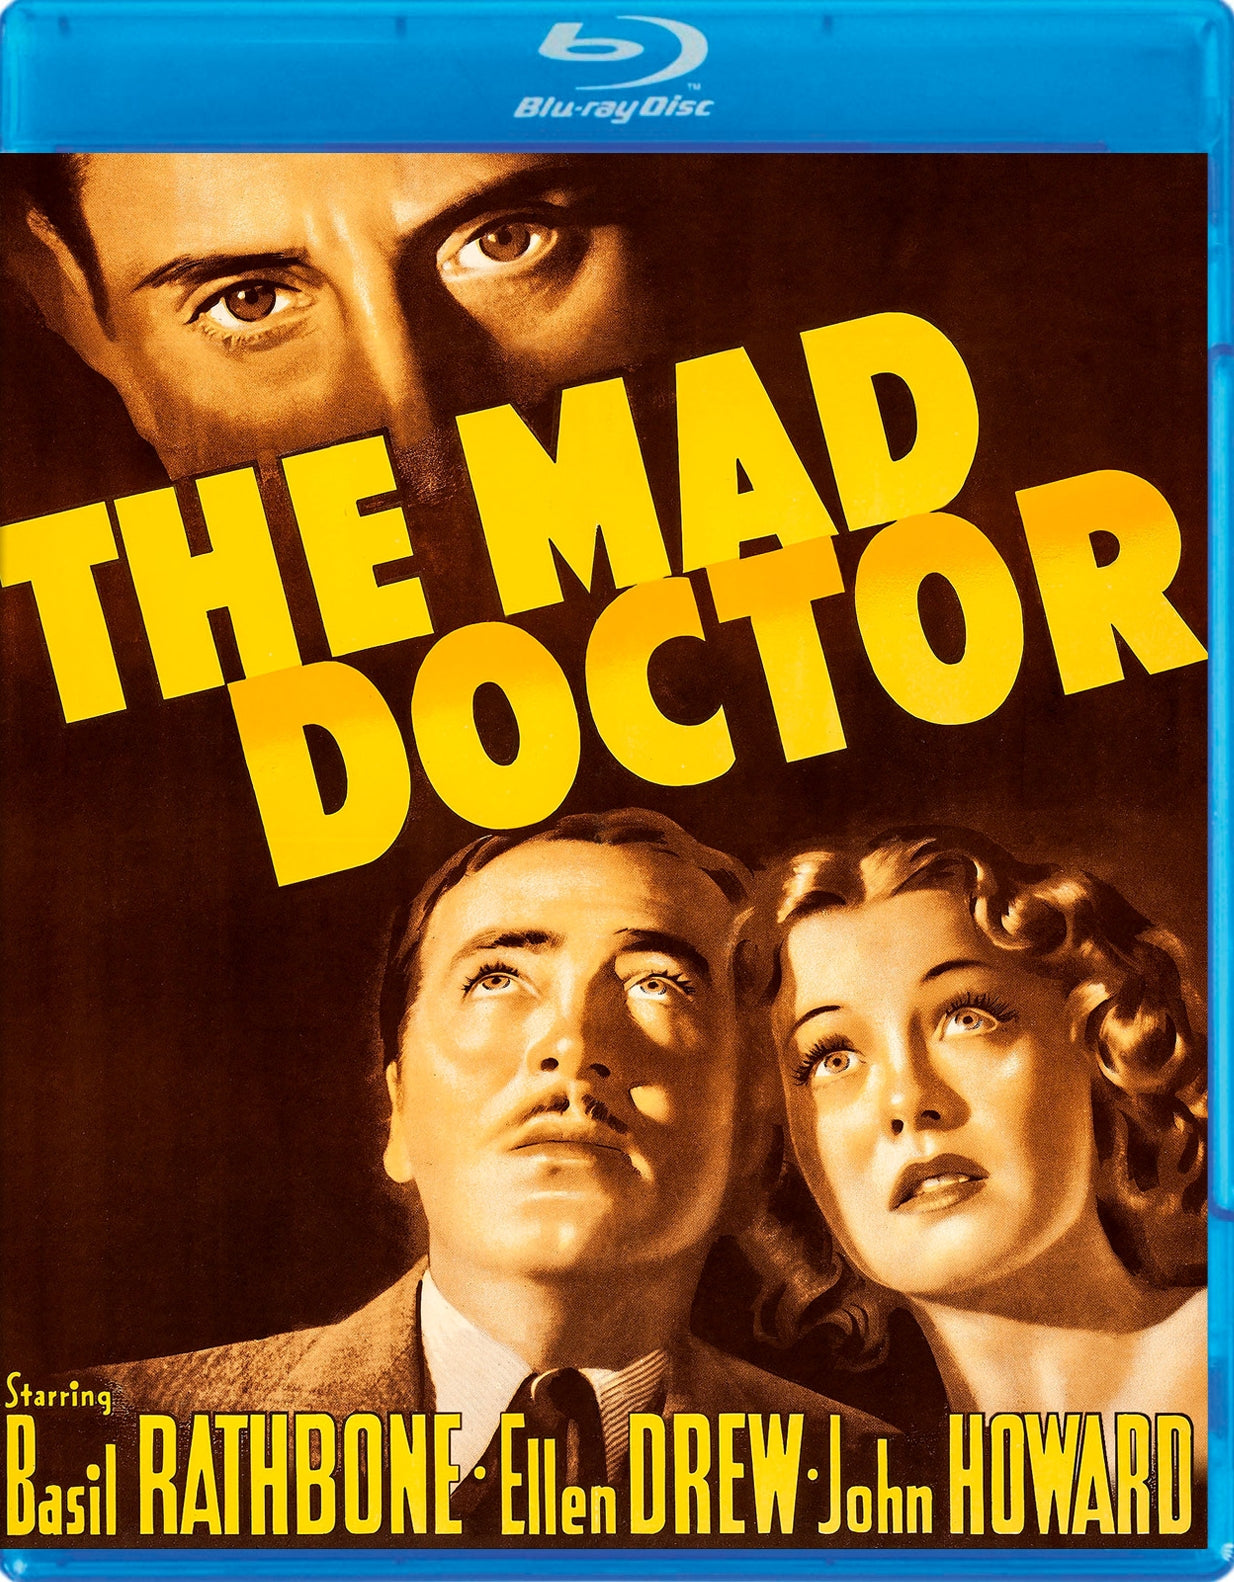 Mad Doctor [Blu-ray] cover art